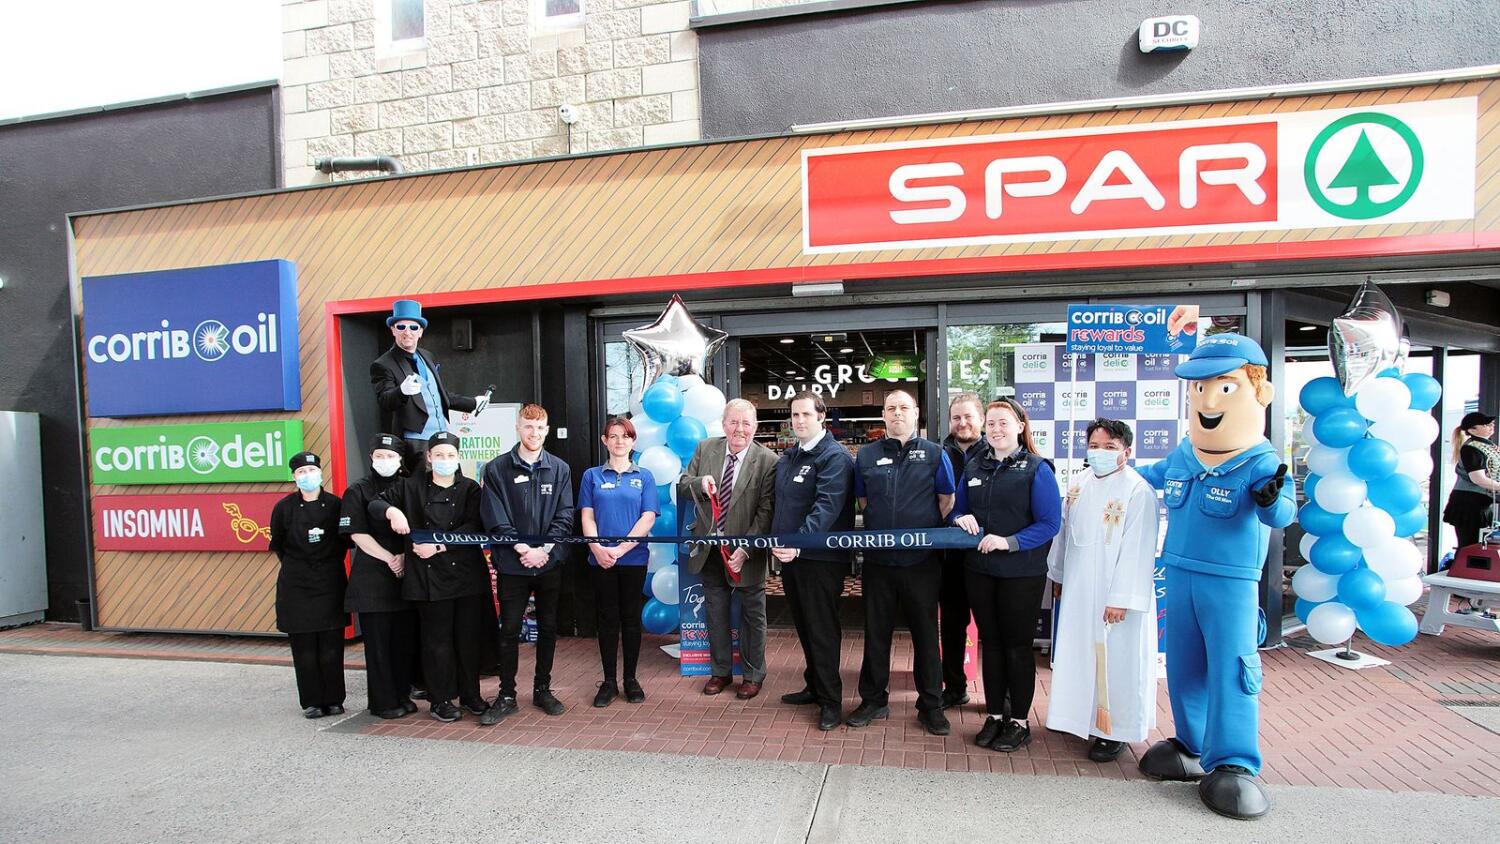 Corrib Oil Spar officially opens in Athlone